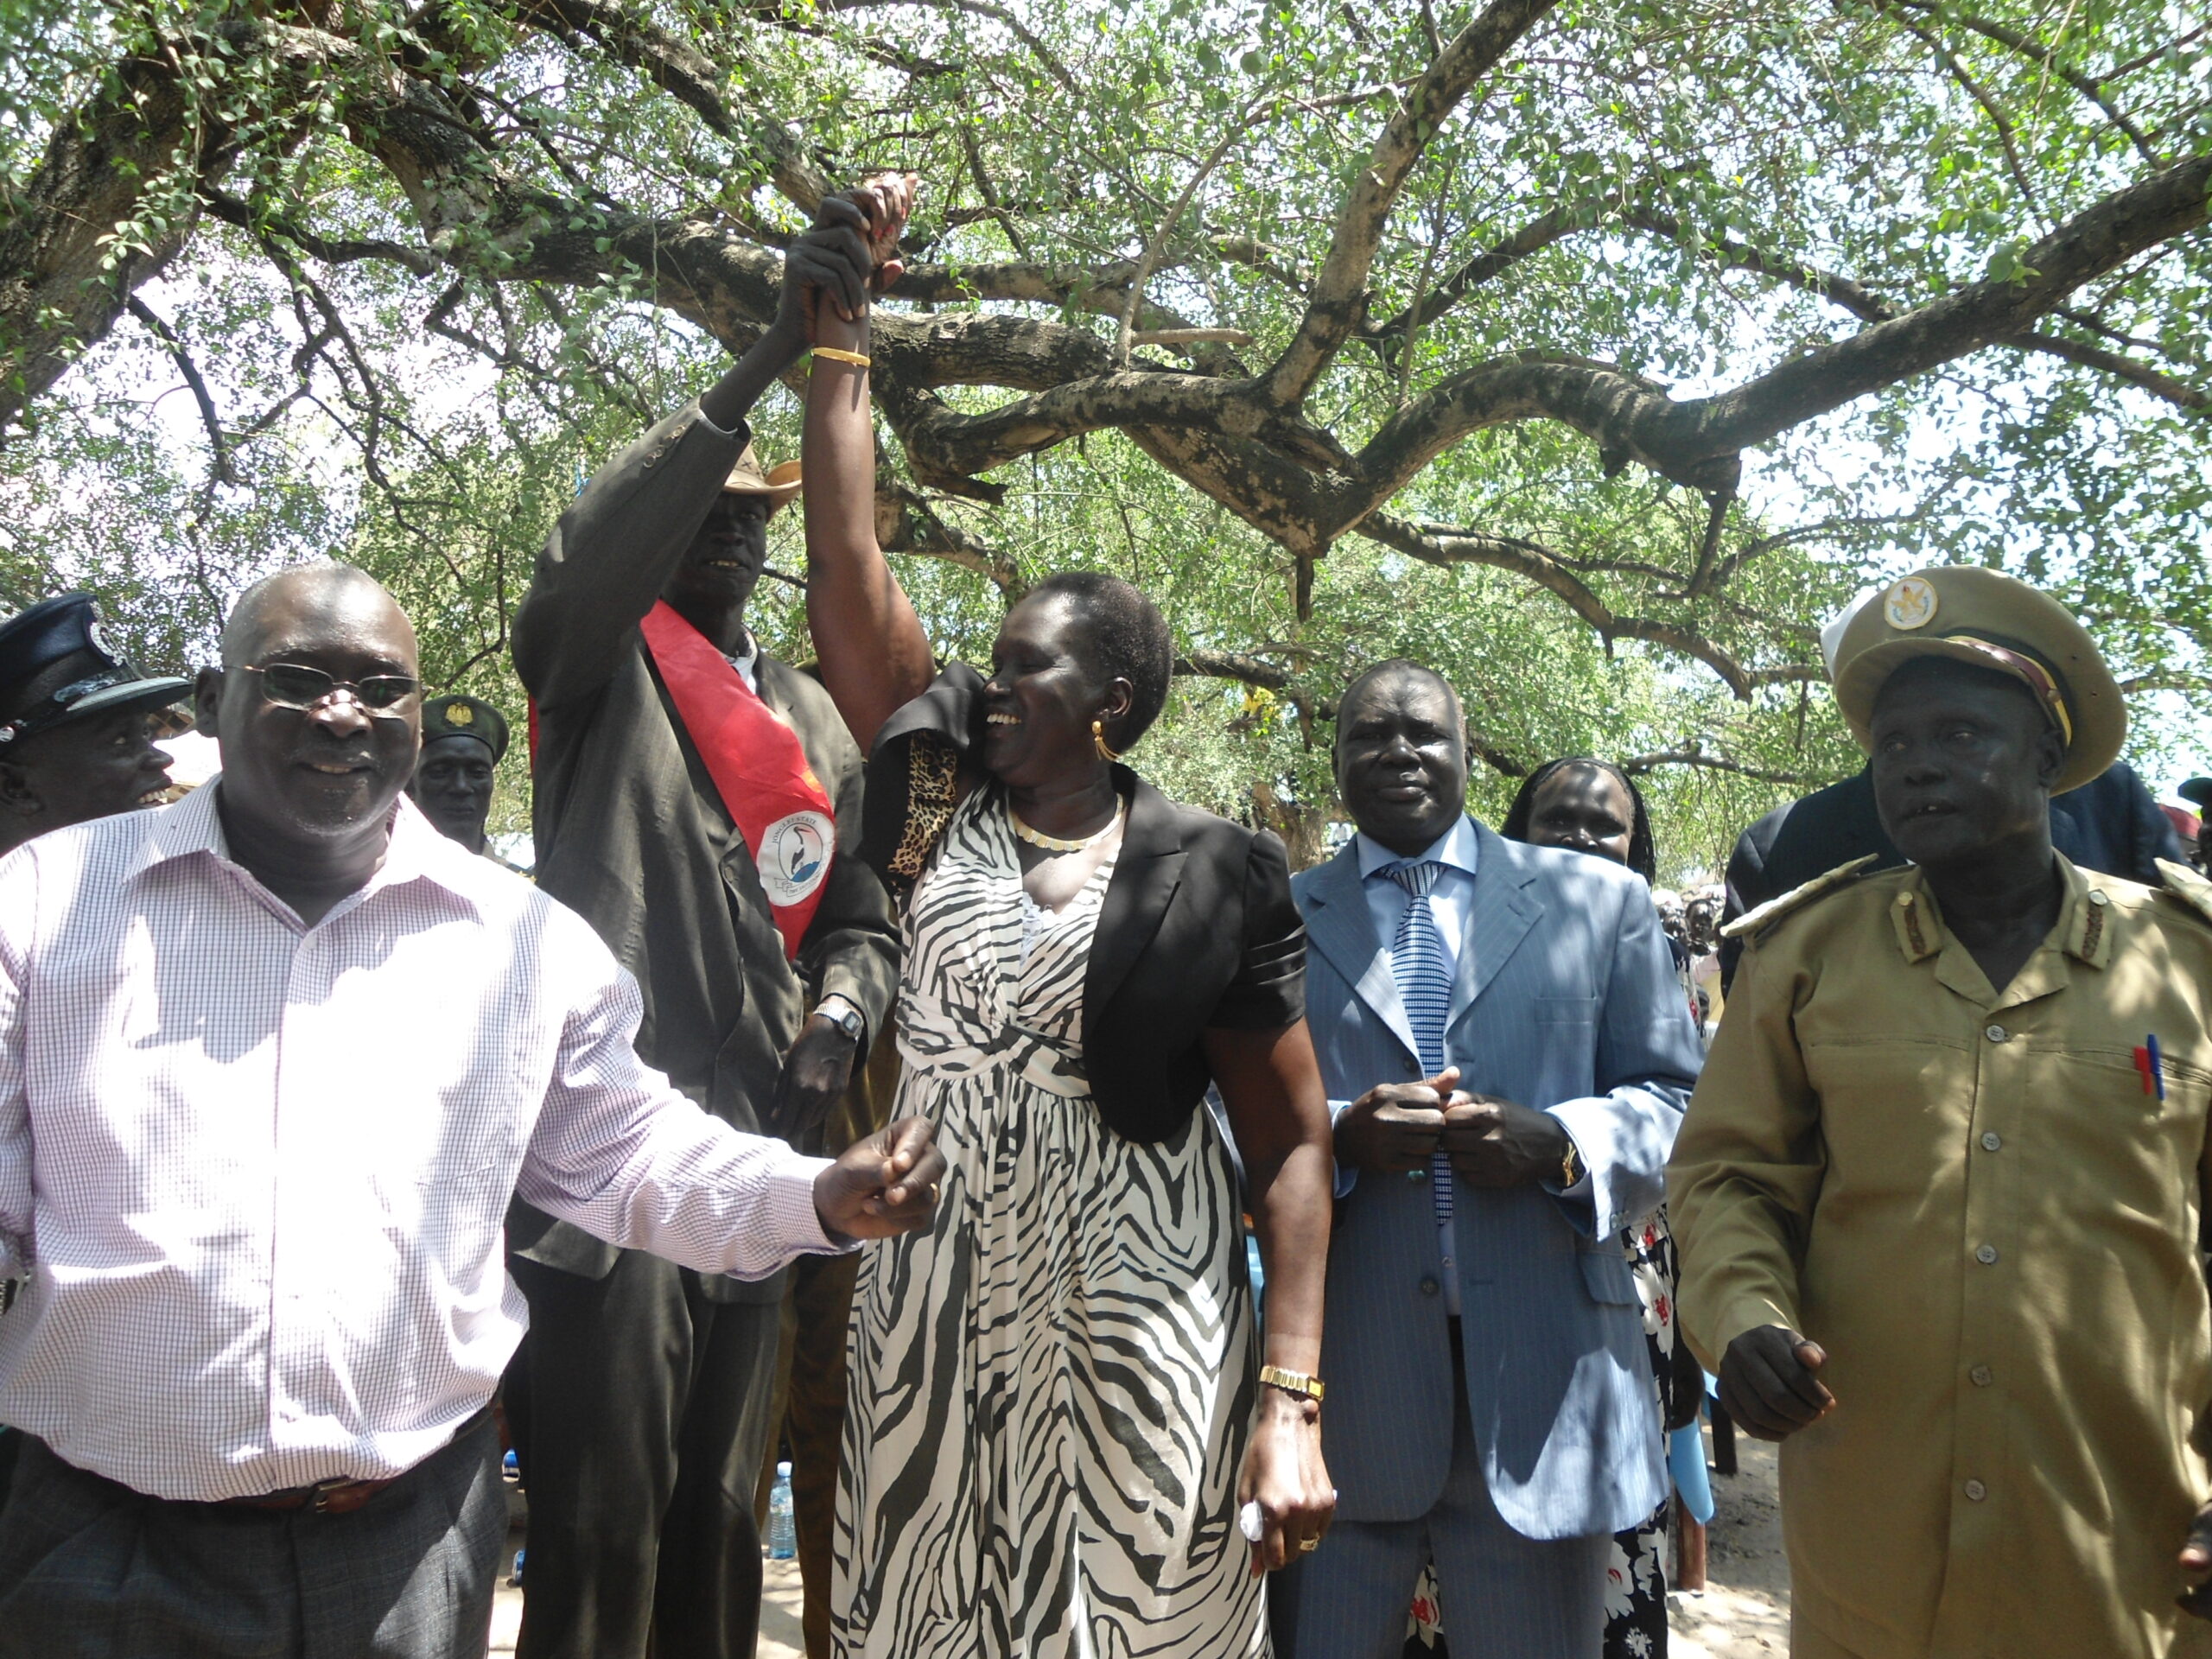 From the left Brig. General Atem Manyok, Rebecca Nyandeng Garang, with her right hands raised by a chief, Koch Deng Koch, (Maroldit), The commissioner of Twic East County, Dau Akoi, after being amazed by one of the artists, Nyan-paleu at Panyagoor, 9 July 2012  (ST)